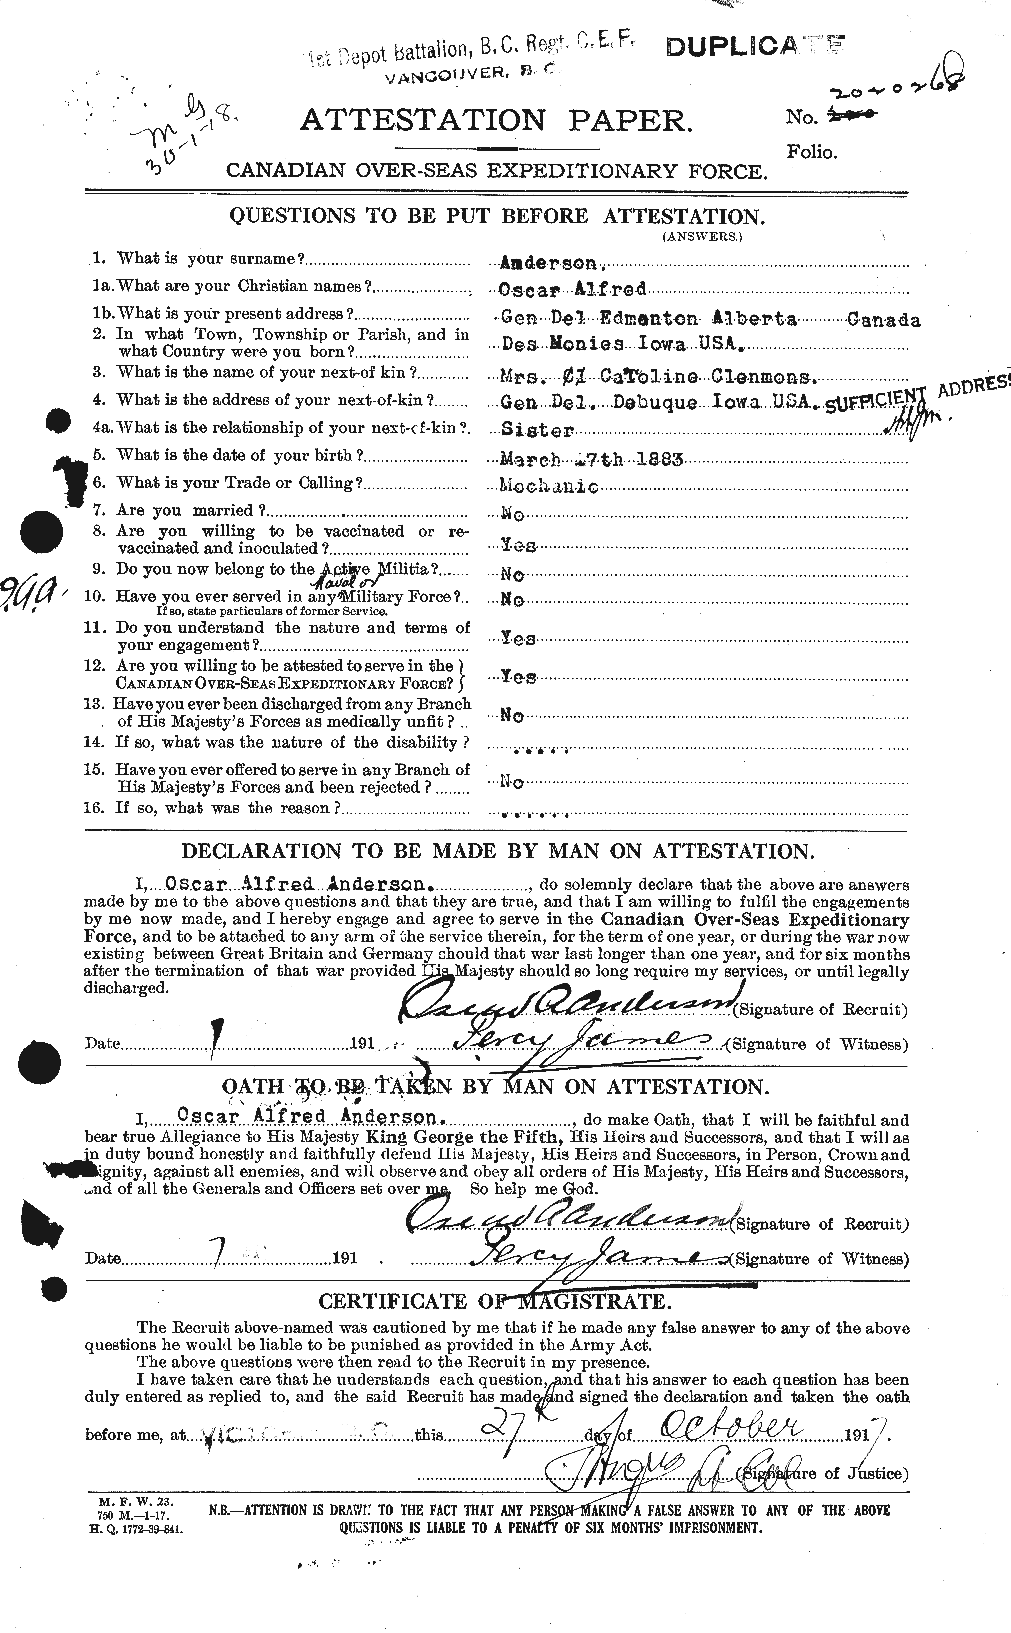 Personnel Records of the First World War - CEF 207383a